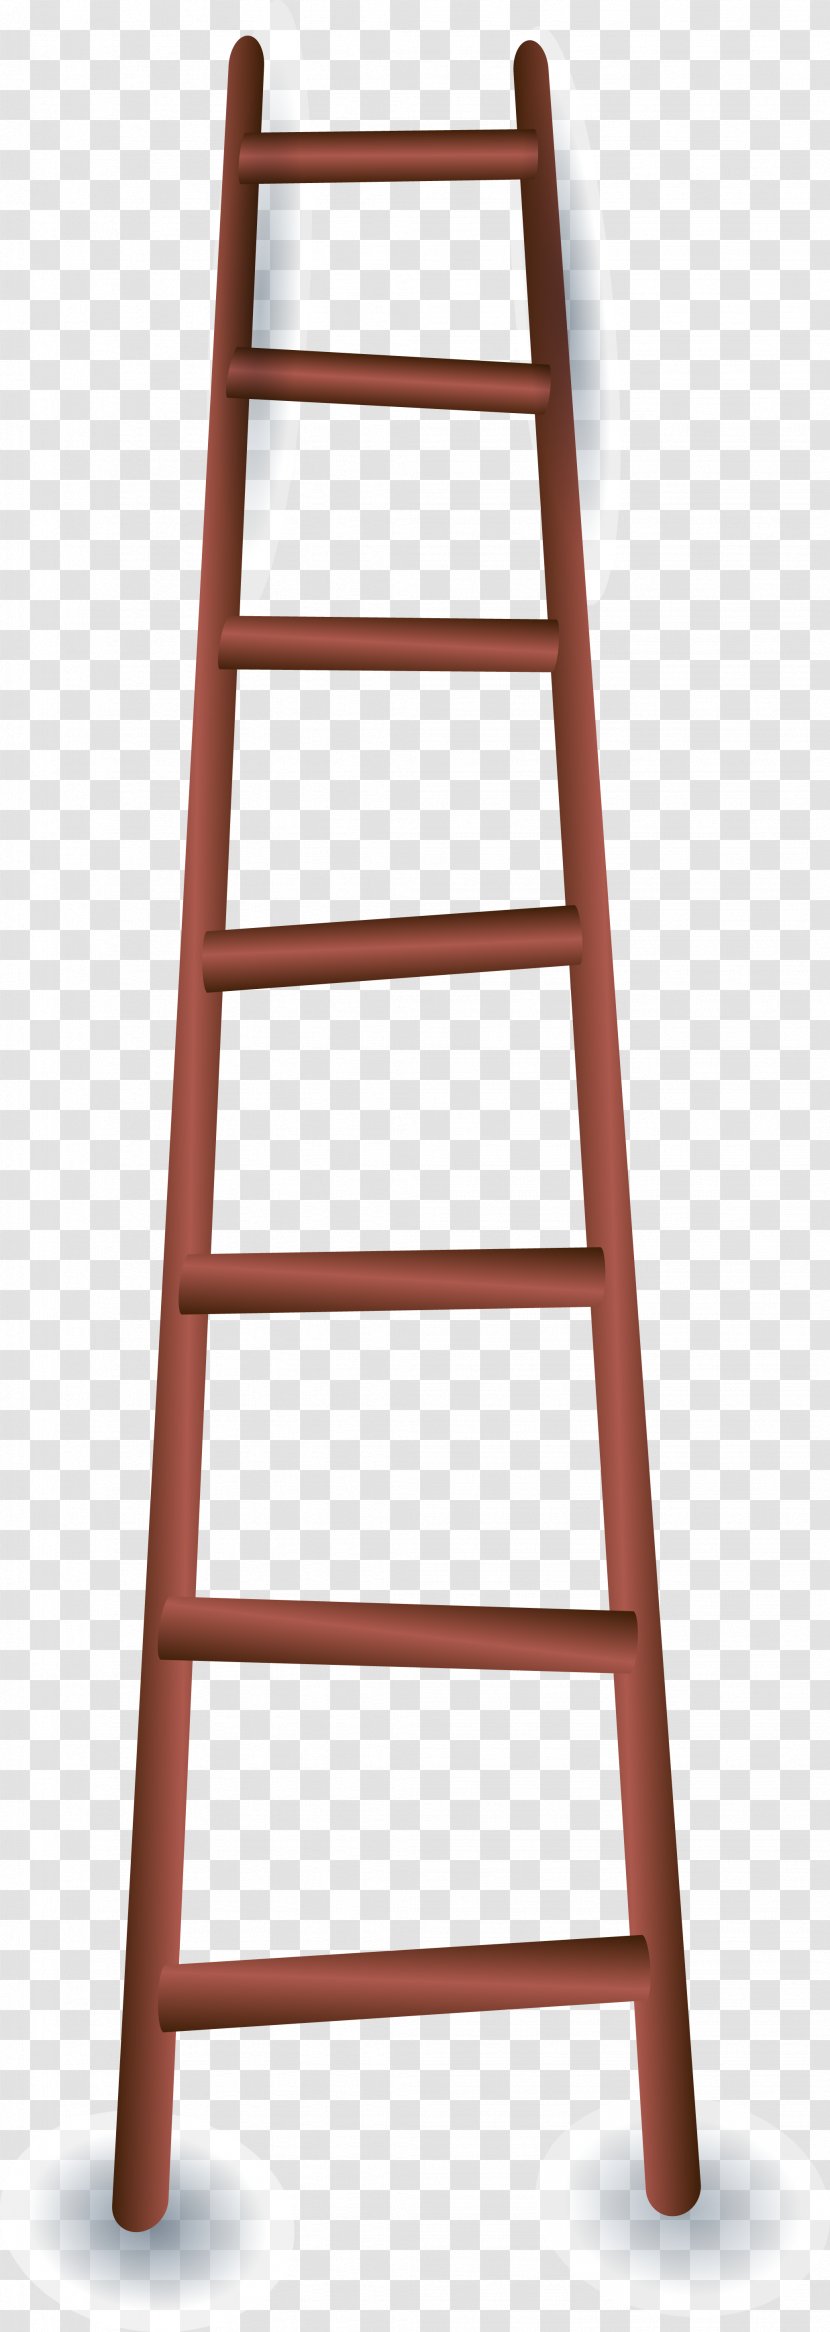 Ladder Stairs Icon - Animation Transparent PNG